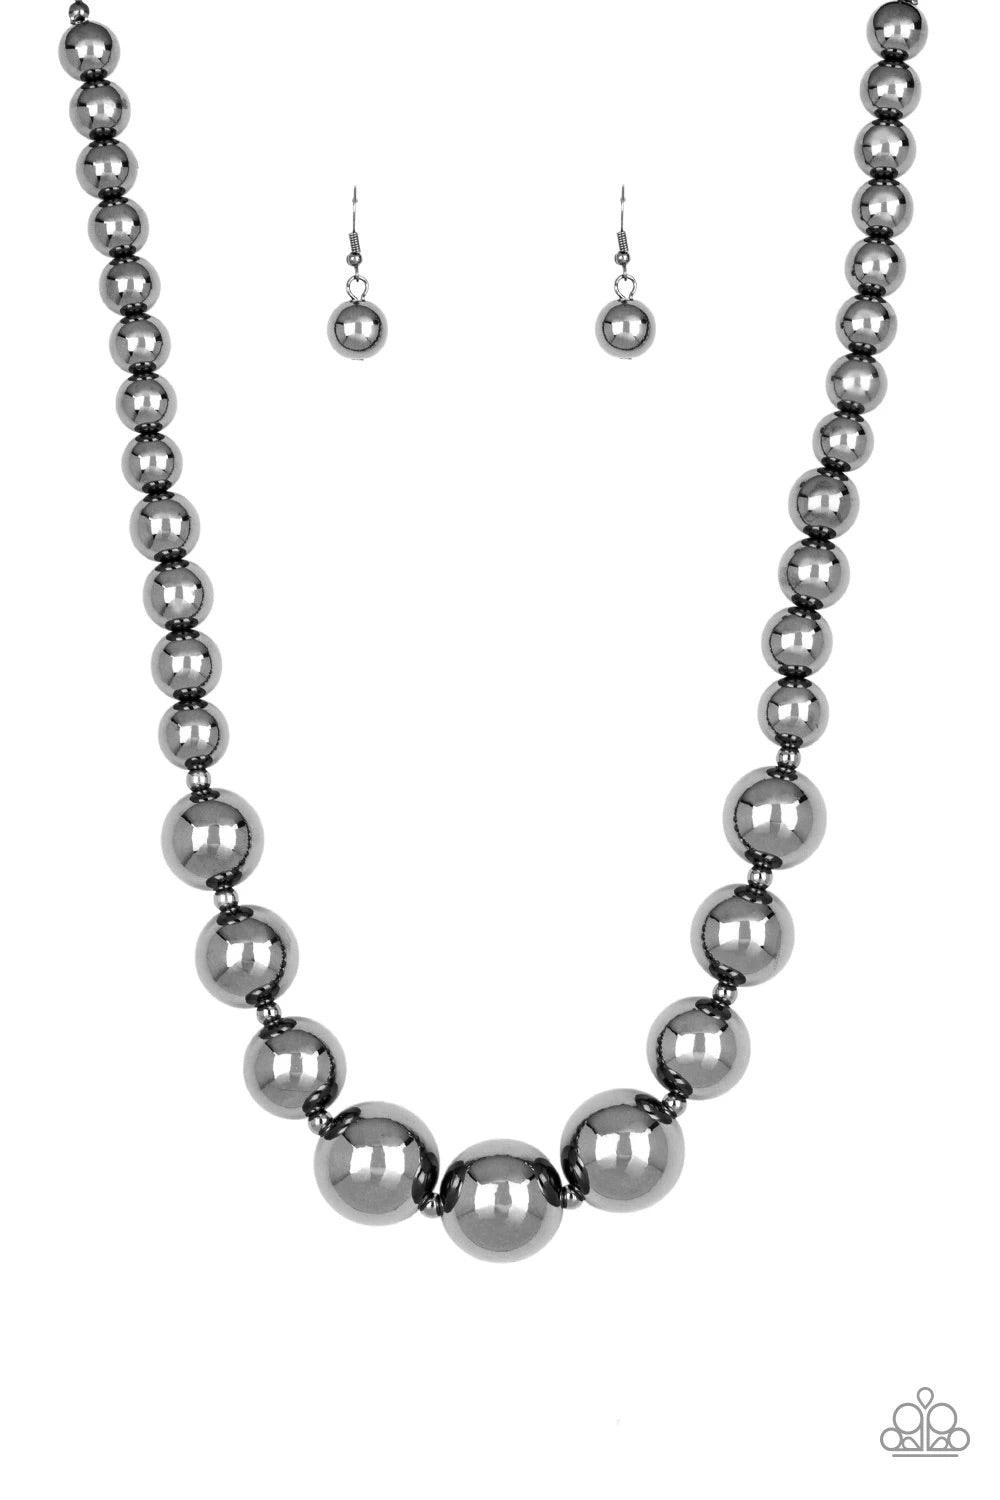 Paparazzi Accessories Living Up To Reputation - Black A collection of bold gunmetal beads are threaded along an invisible wire below the collar. The glistening beads dramatically increase in size as they reach the center for an undeniable statement-making